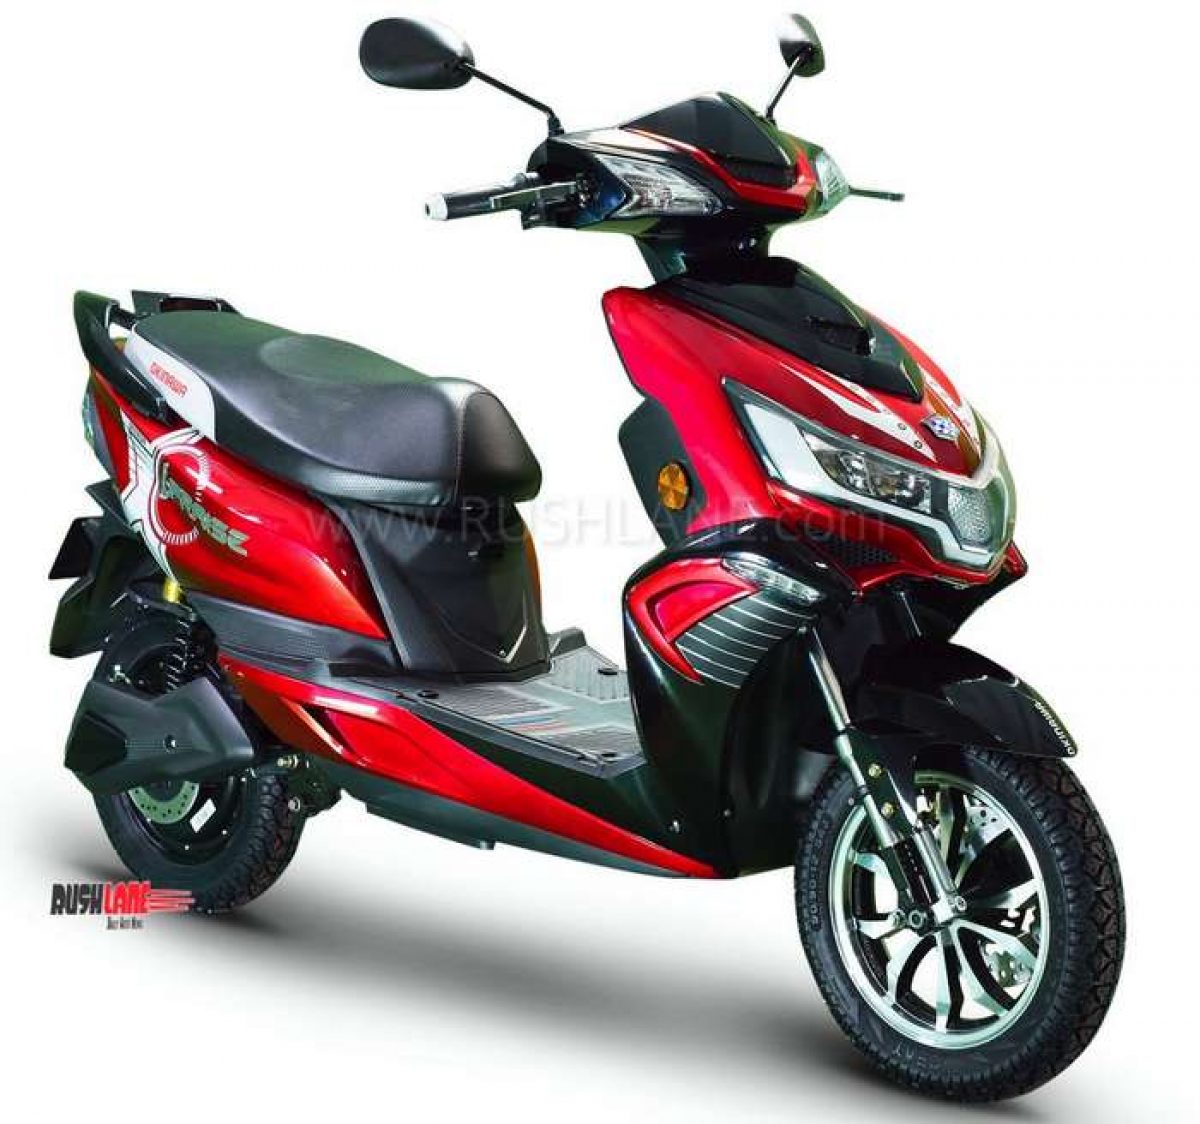 battery scooty image and price